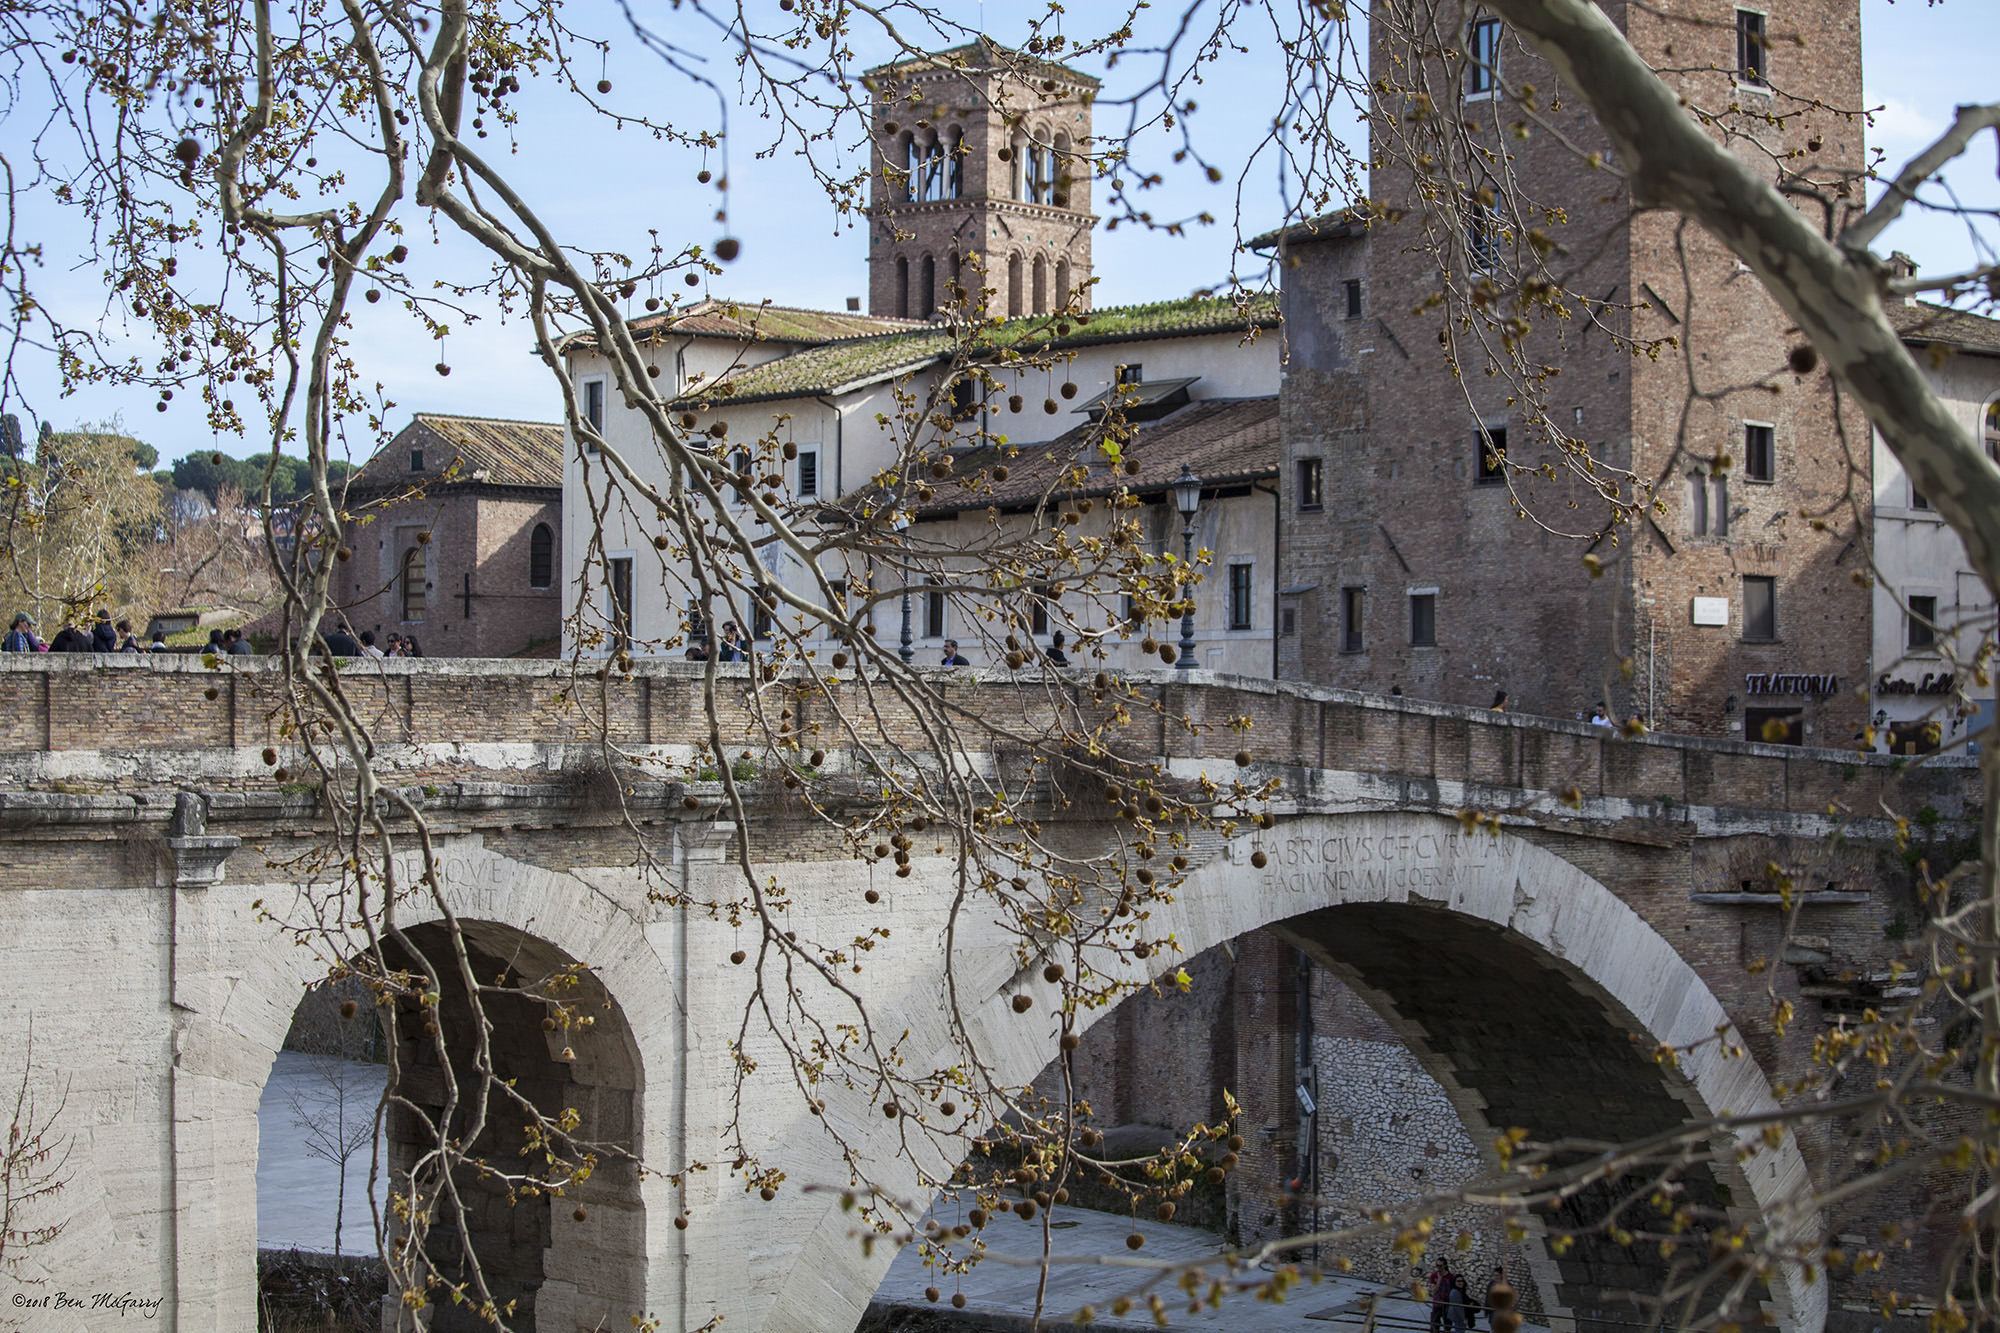 Ancient bridge in Rome Italy linking Trastevere to the city